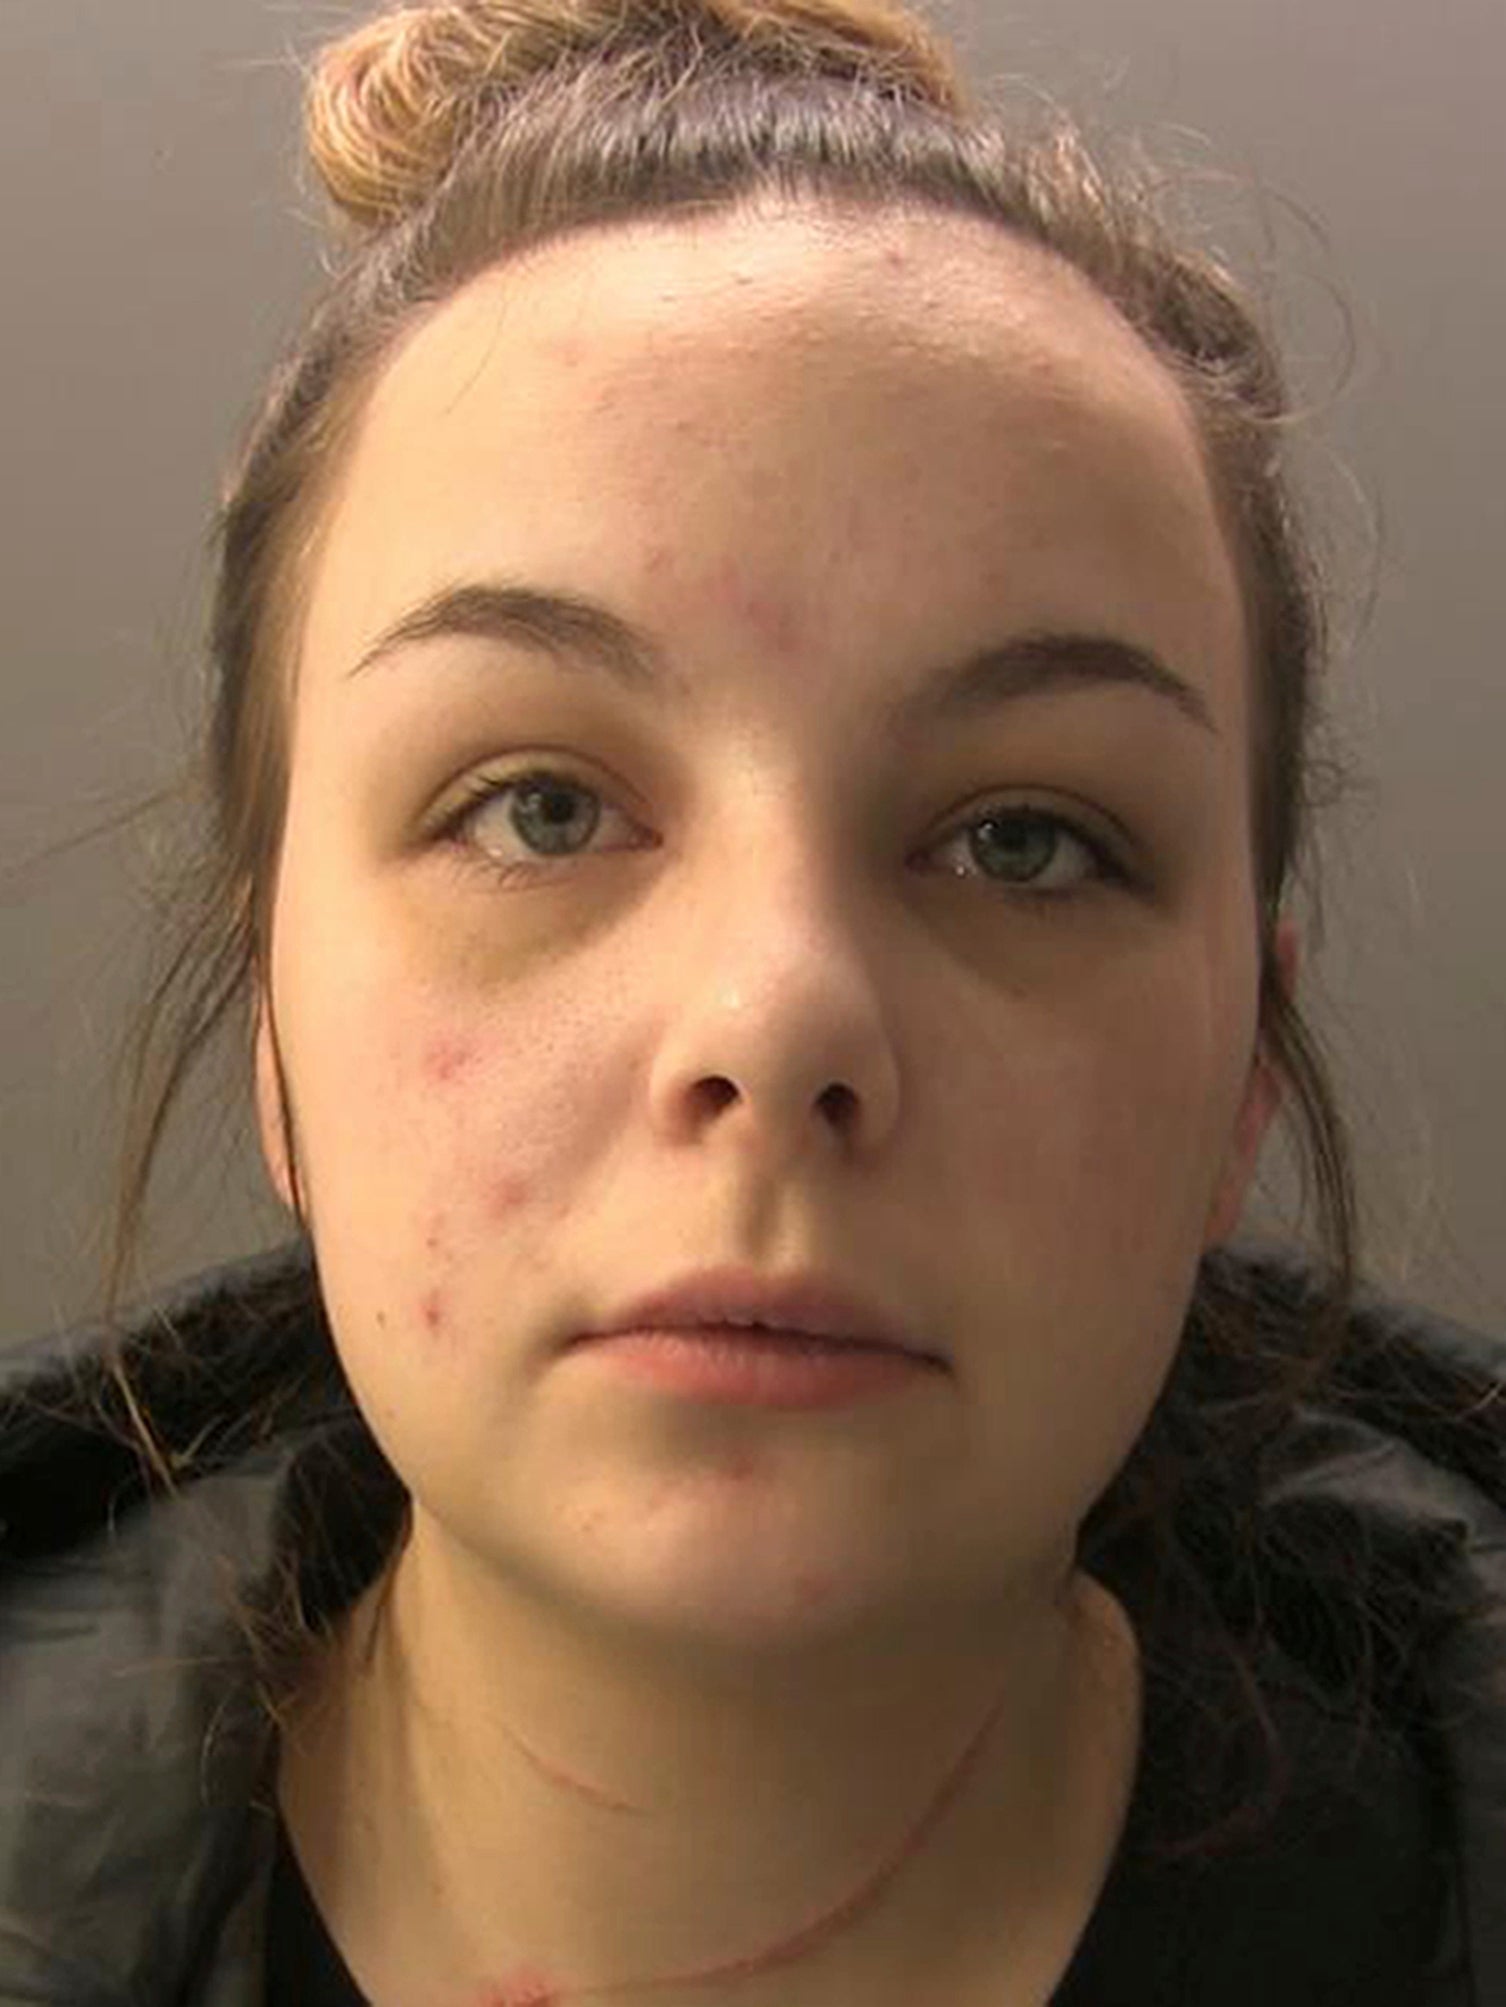 Fake sex abuse claims get British woman 8.5 year prison term The Independent image pic